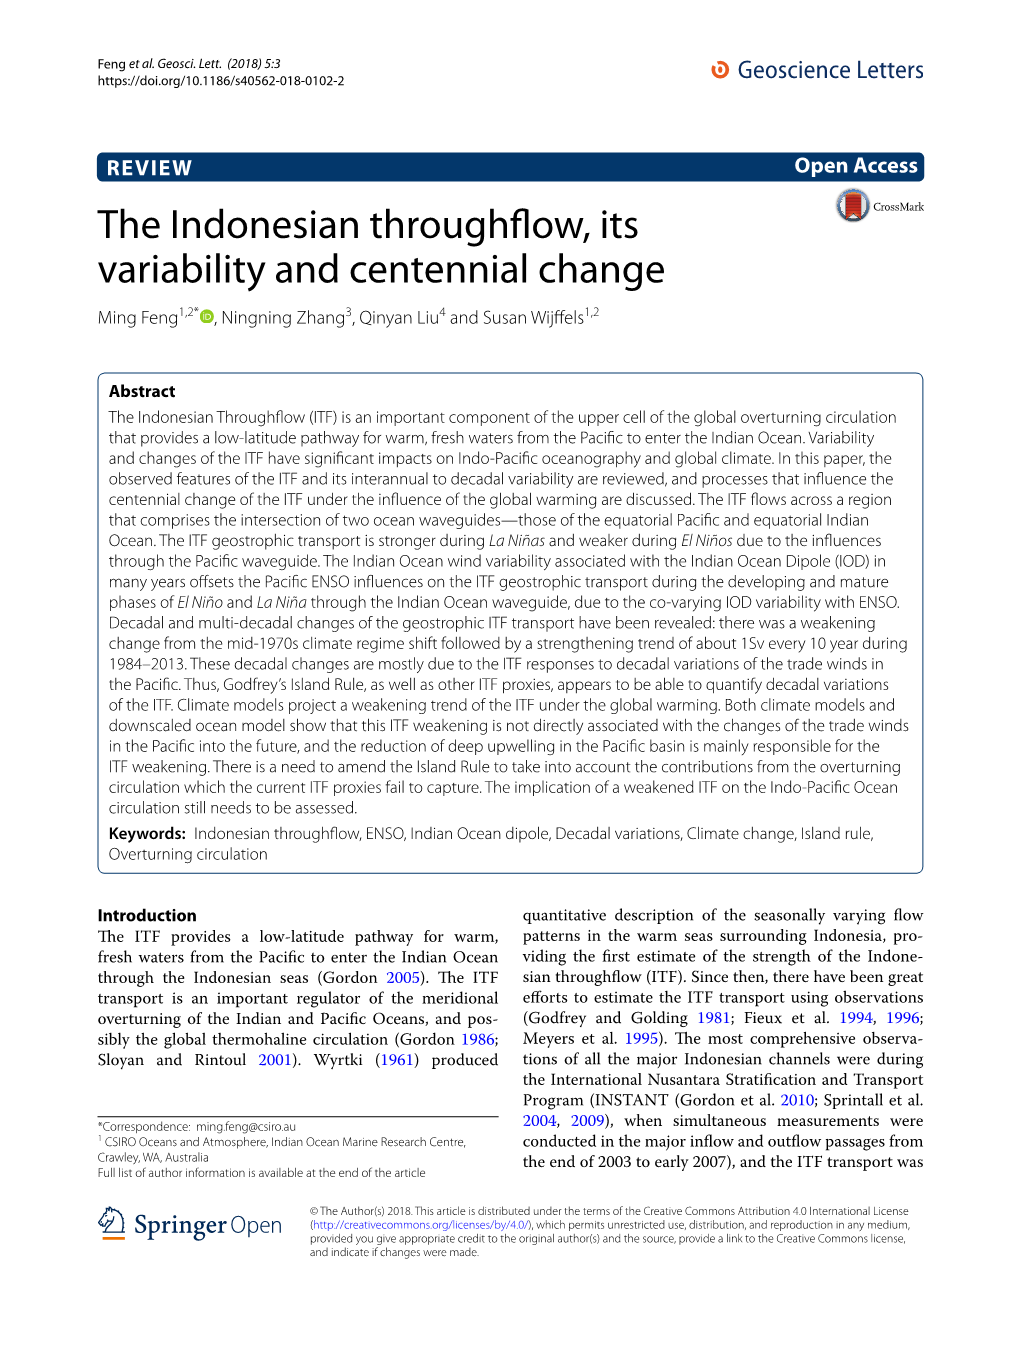 The Indonesian Throughflow, Its Variability and Centennial Change